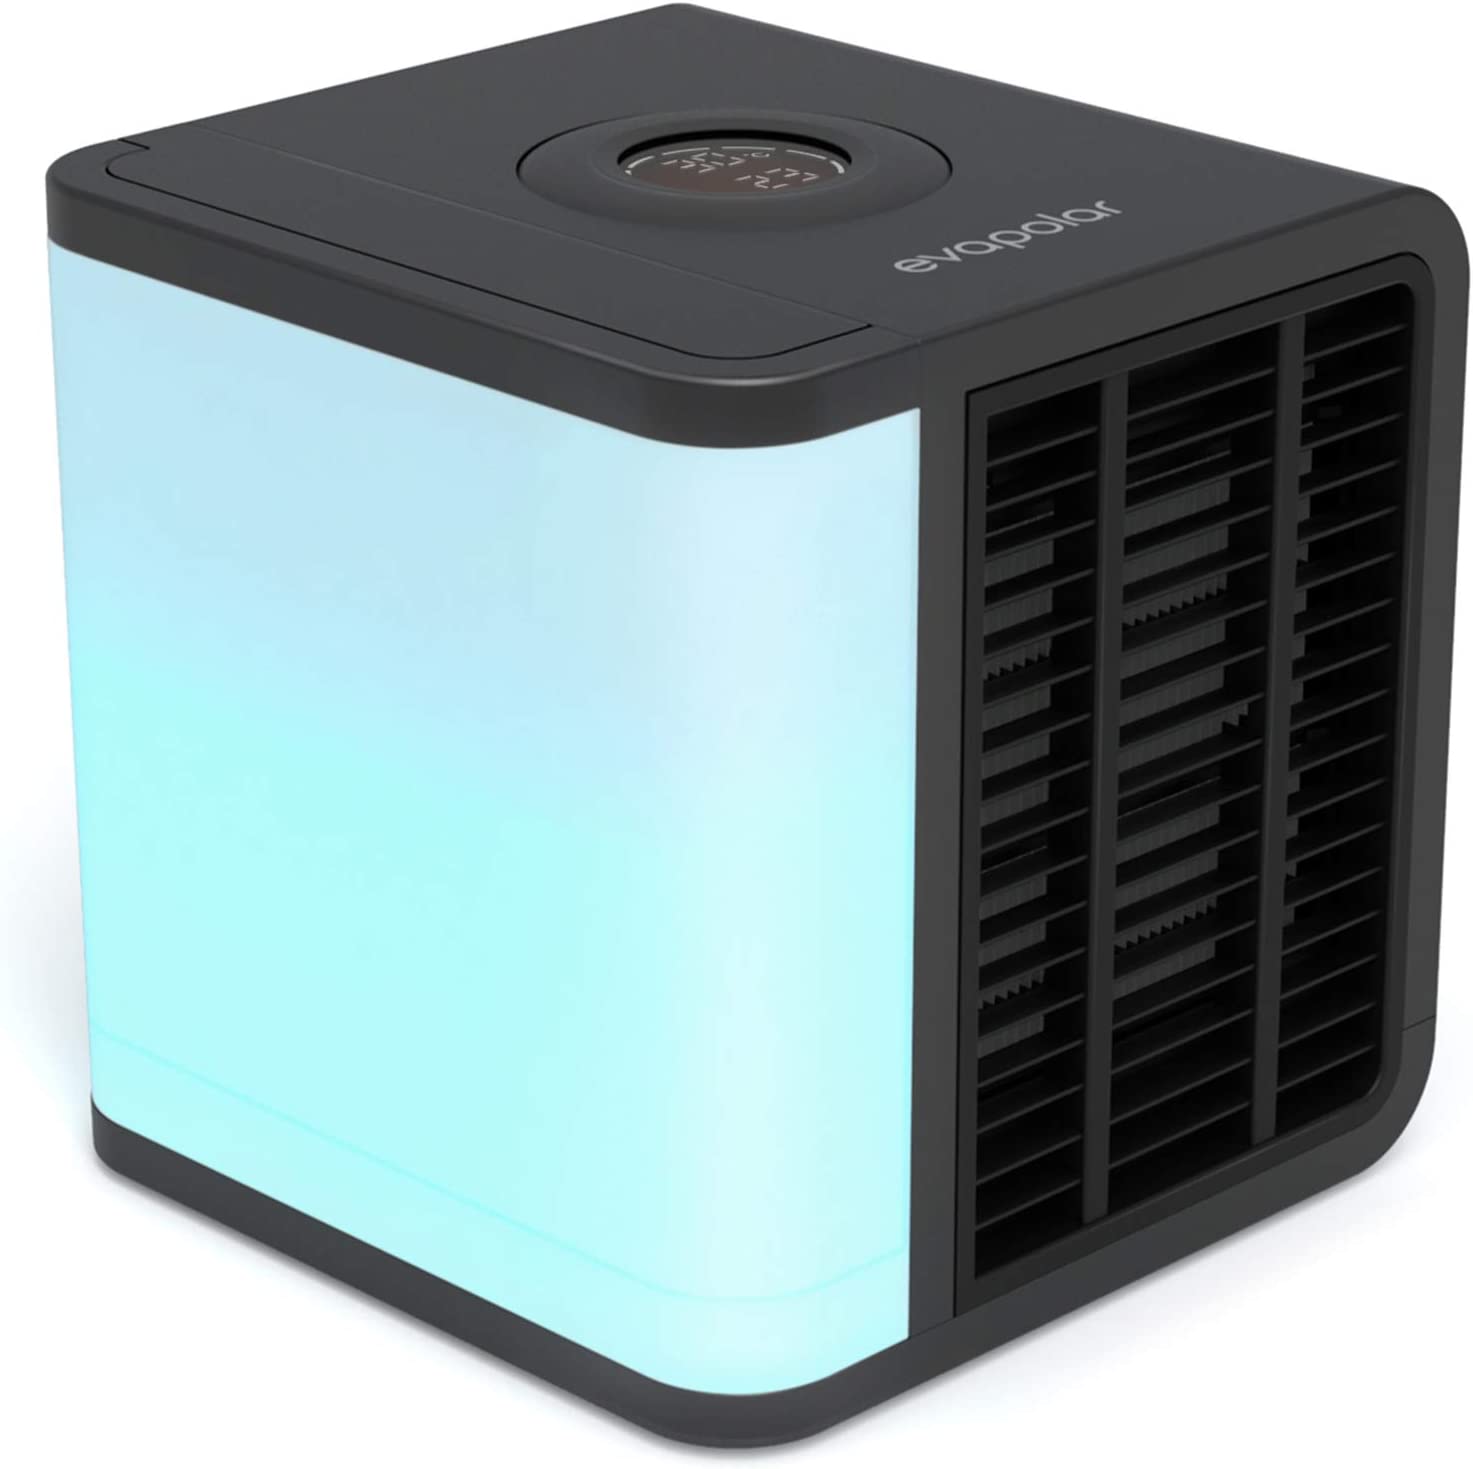 evaLIGHT Plus Personal Portable Air Cooler and Humidifier, Desktop Cooling Fan, for Home and Office, with USB Connectivity and Colorful Built-in LED Light, Black (EV-1500)